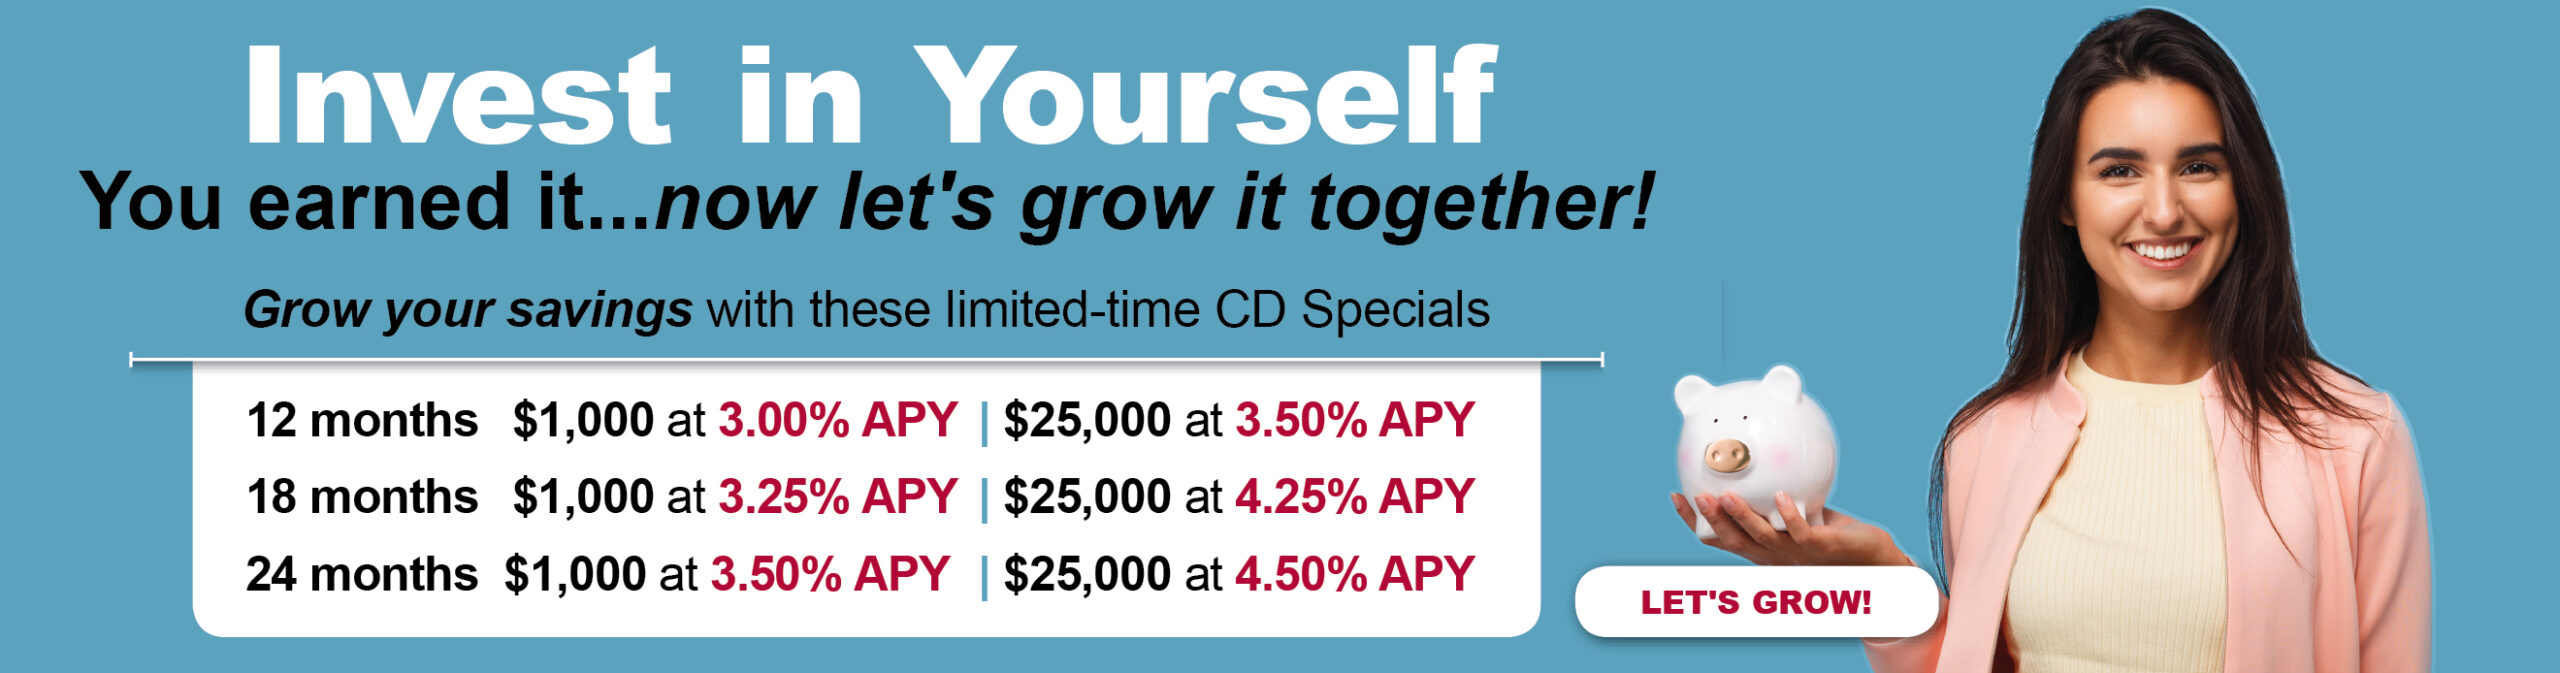 Invest in yourself with great CD rates- call for details.